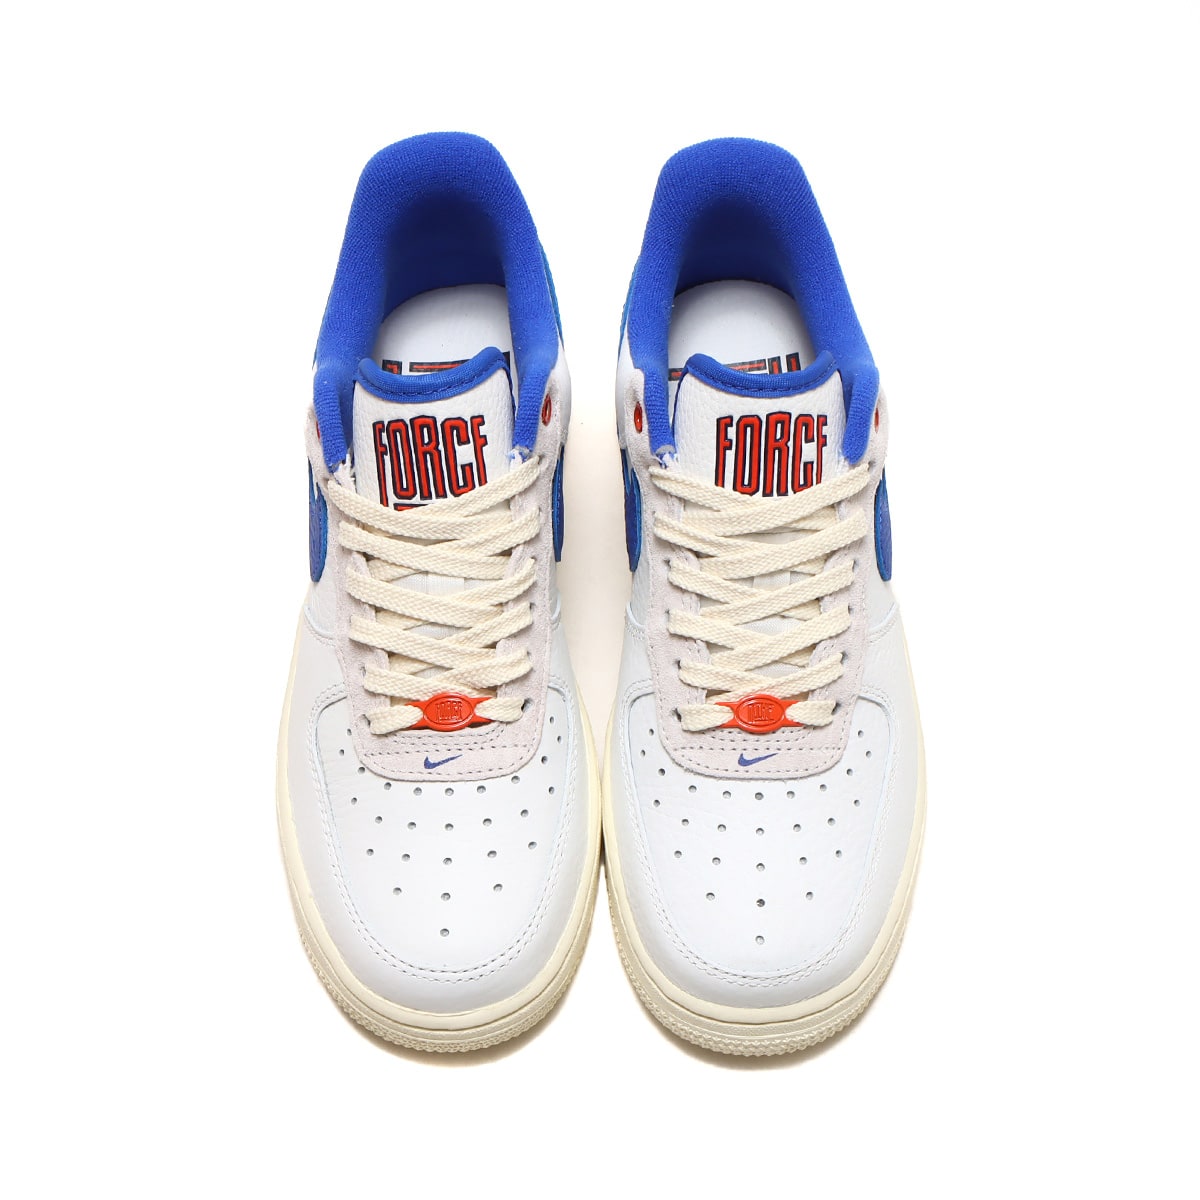 NIKE WMNS AIR FORCE 1 '07 LX SUMMIT WHITE/HYPER ROYAL-PICANTE RED